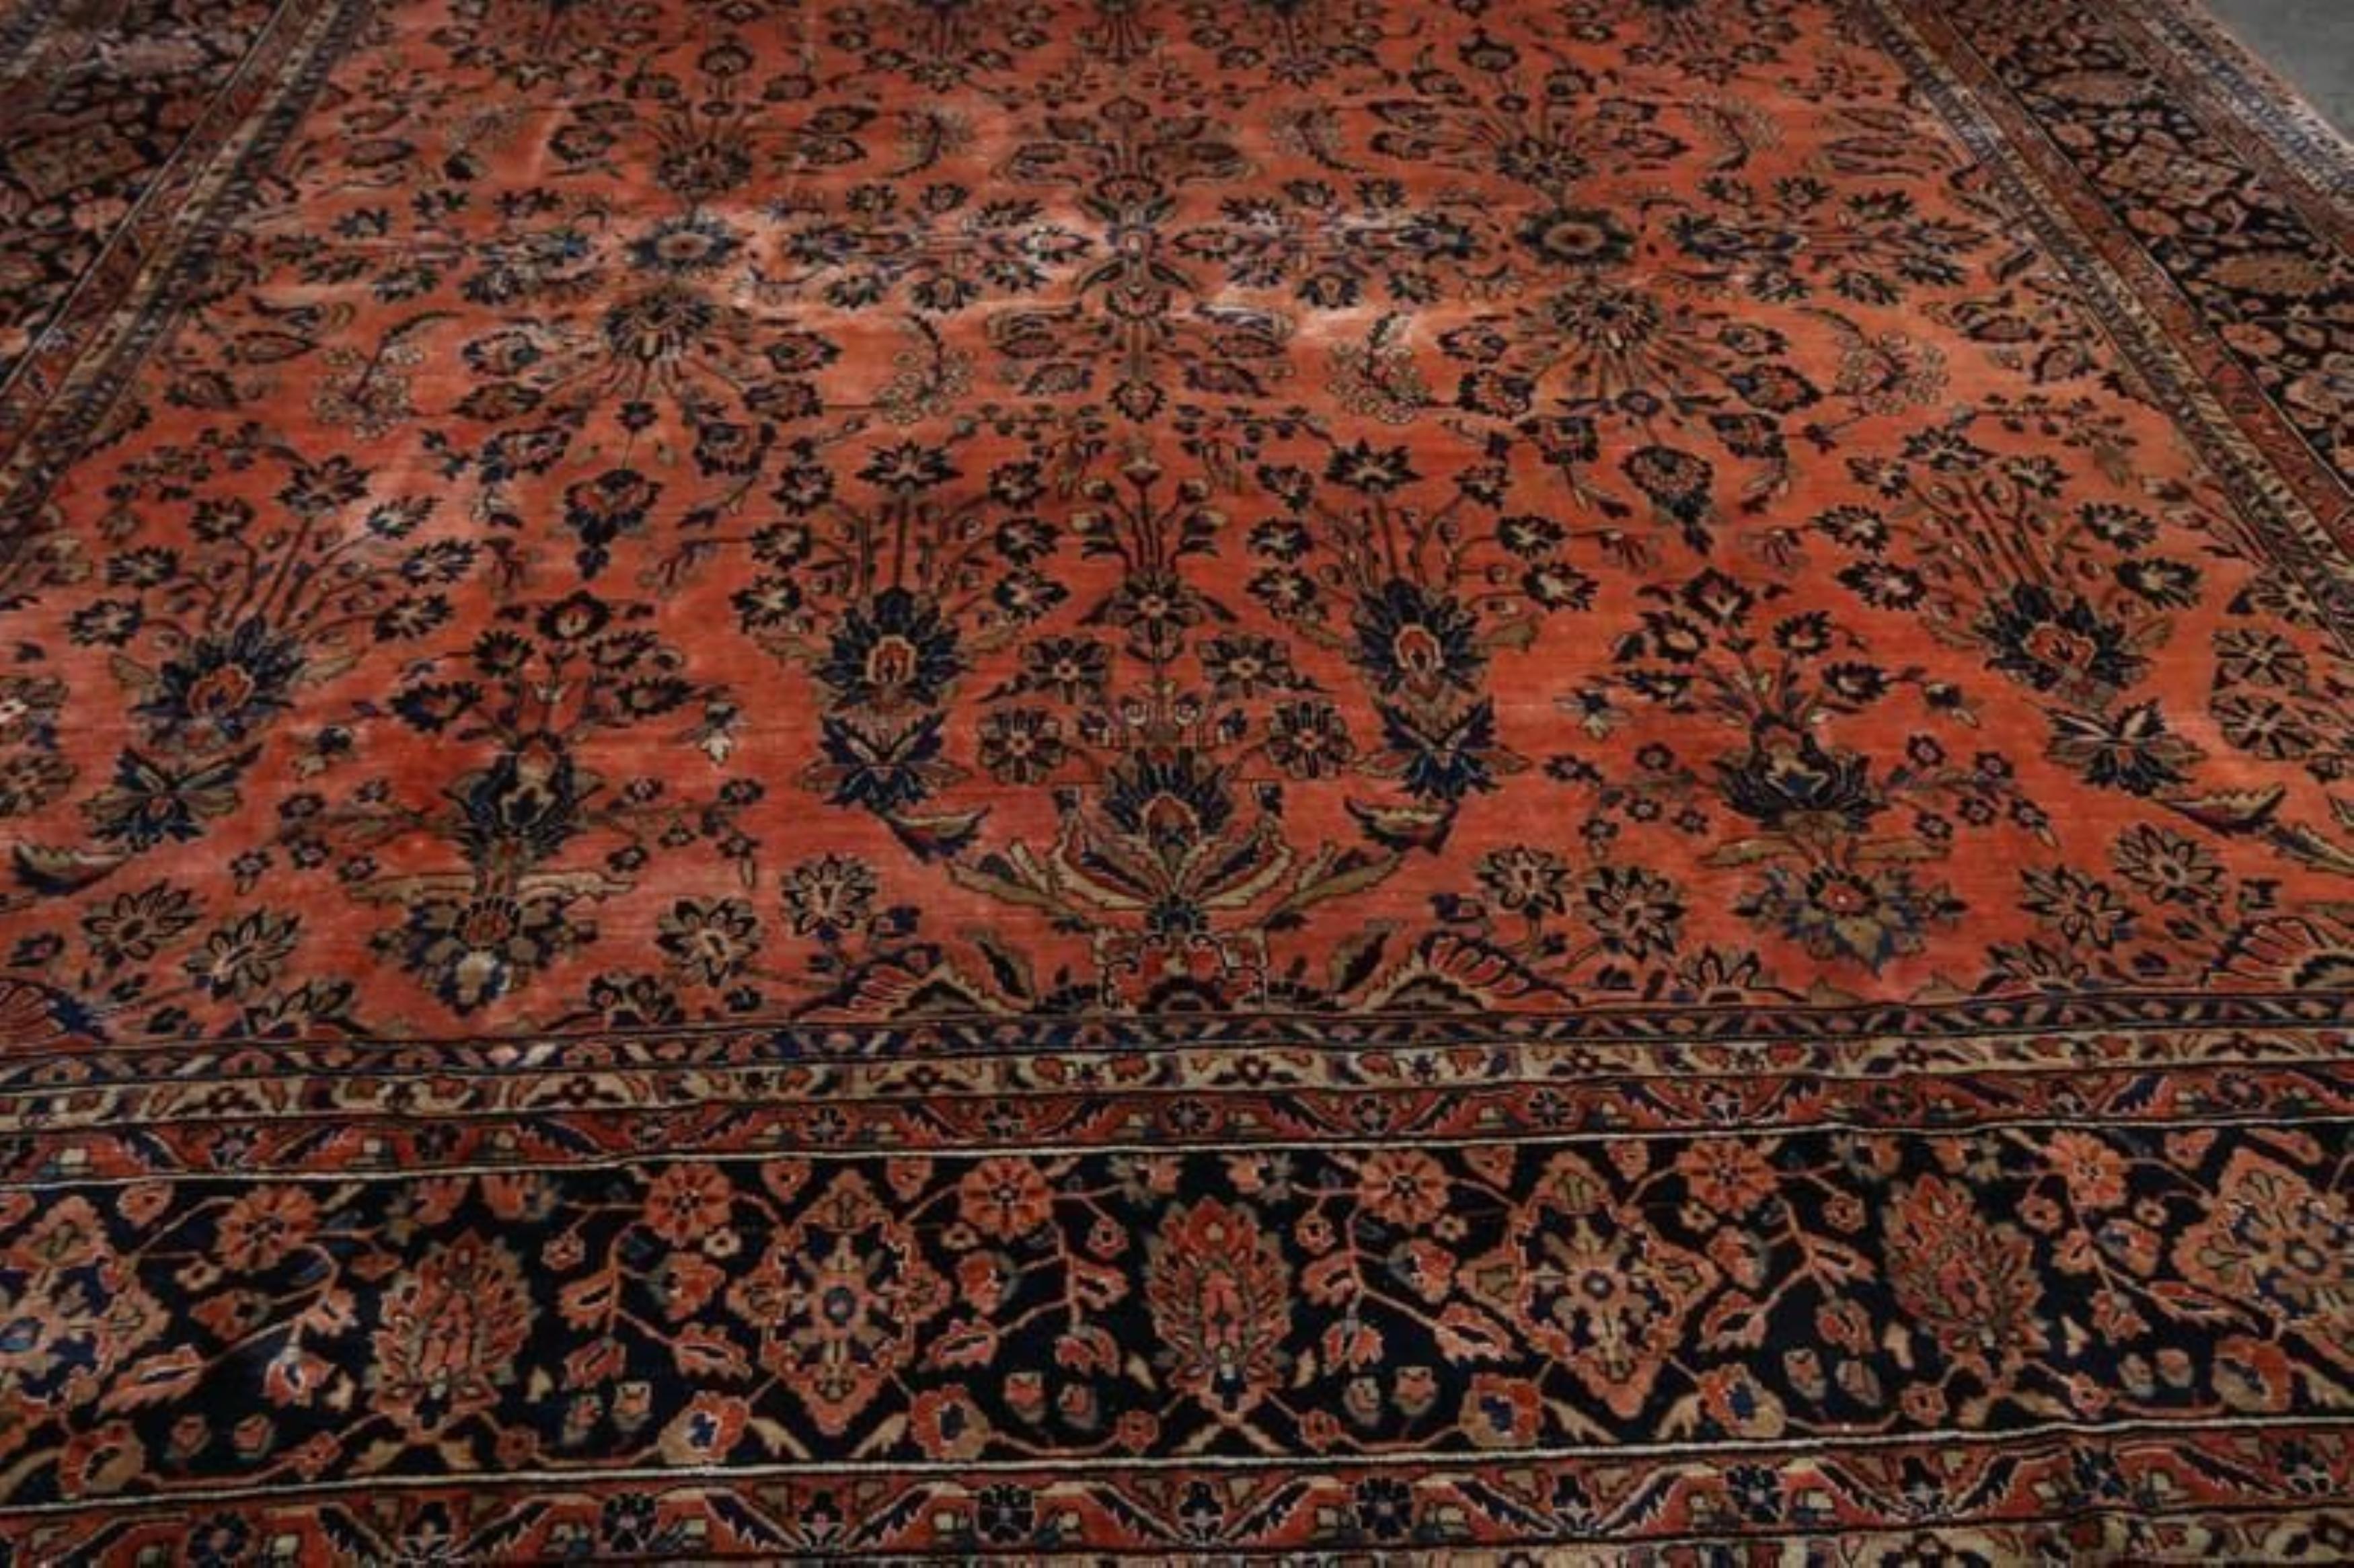 Hand-Knotted Antique Sarouk Persian Rug in Orange and Black Floral Pattern For Sale 1